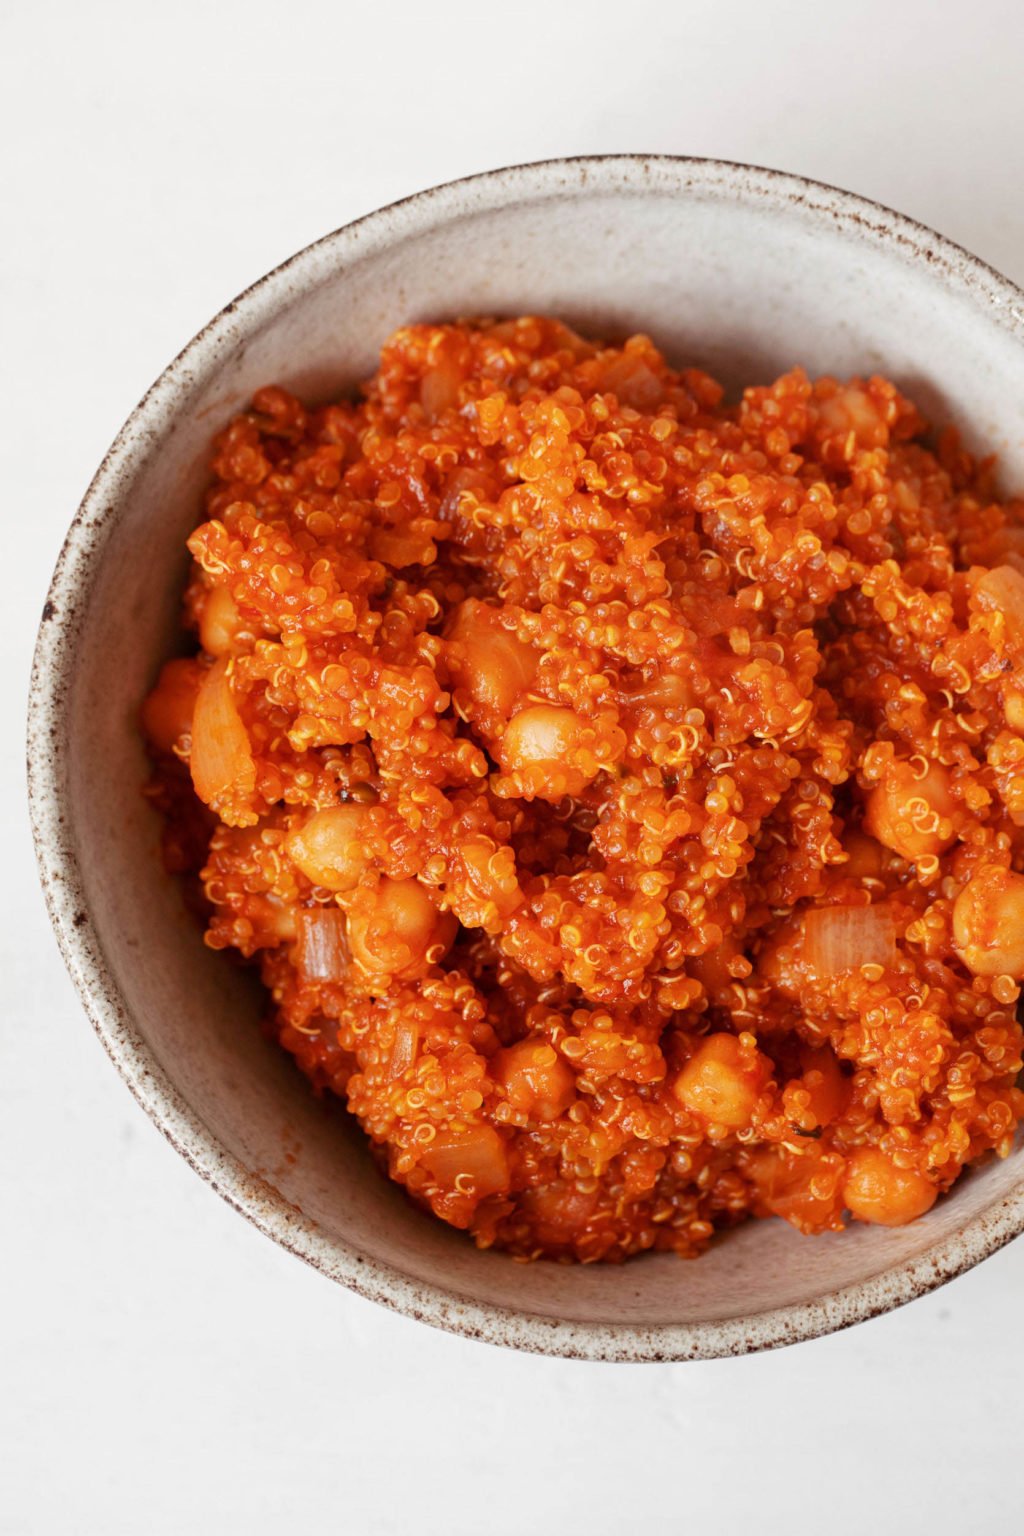 A zoomed in image of a cooked whole grain, which is a bright red color thanks to its seasoning. The grain is mixed with cooked chickpeas and served in a bowl.